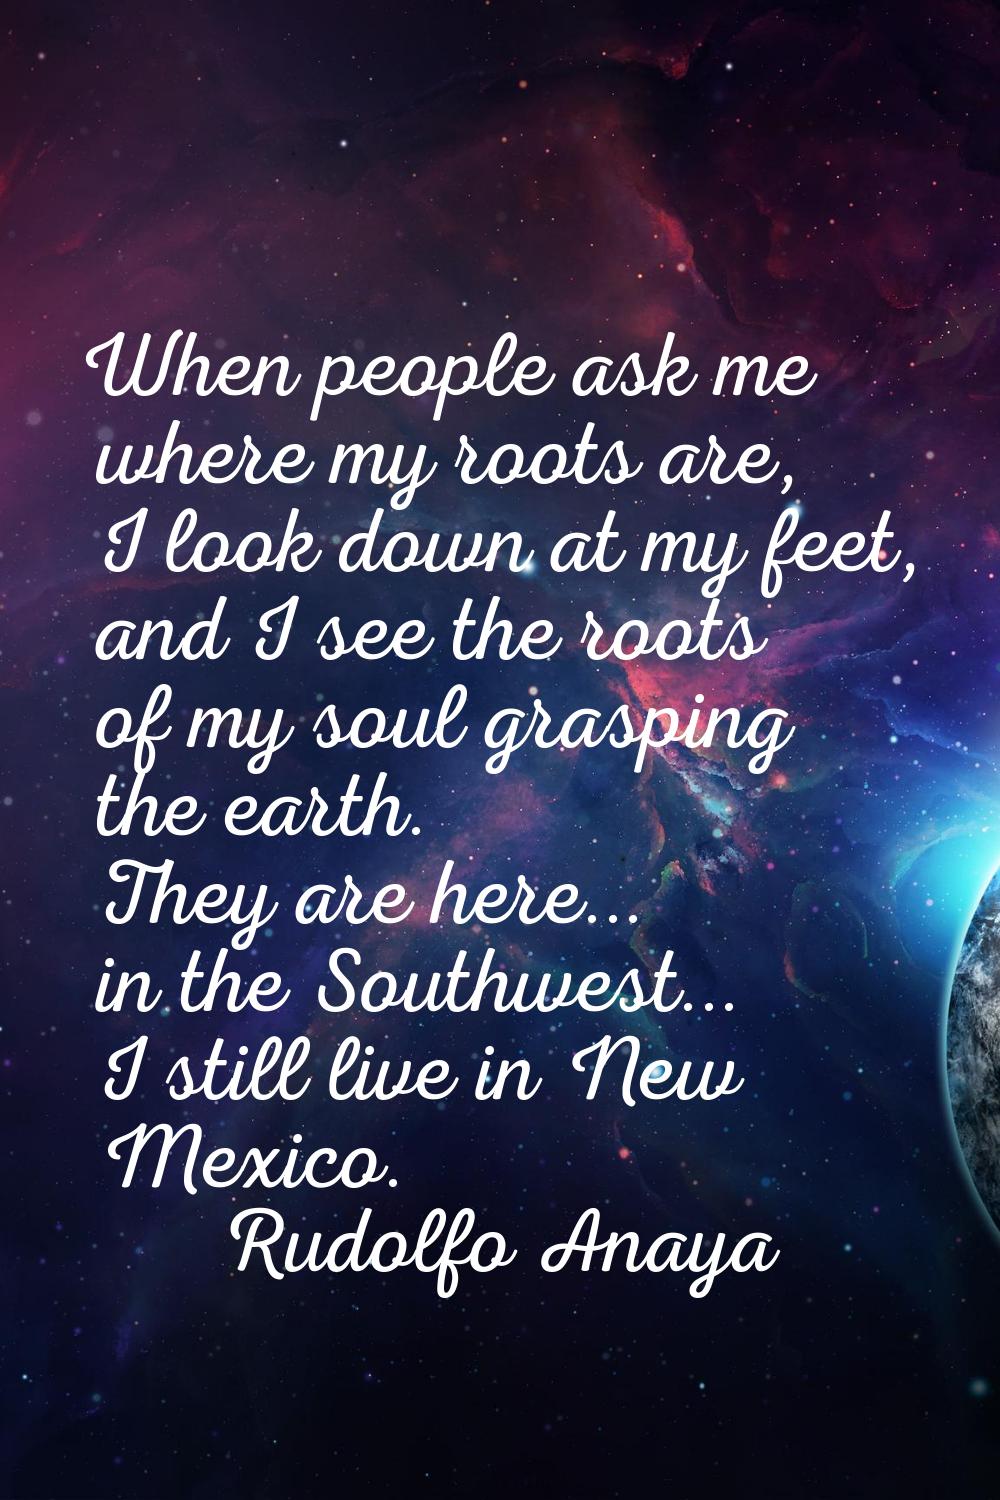 When people ask me where my roots are, I look down at my feet, and I see the roots of my soul grasp